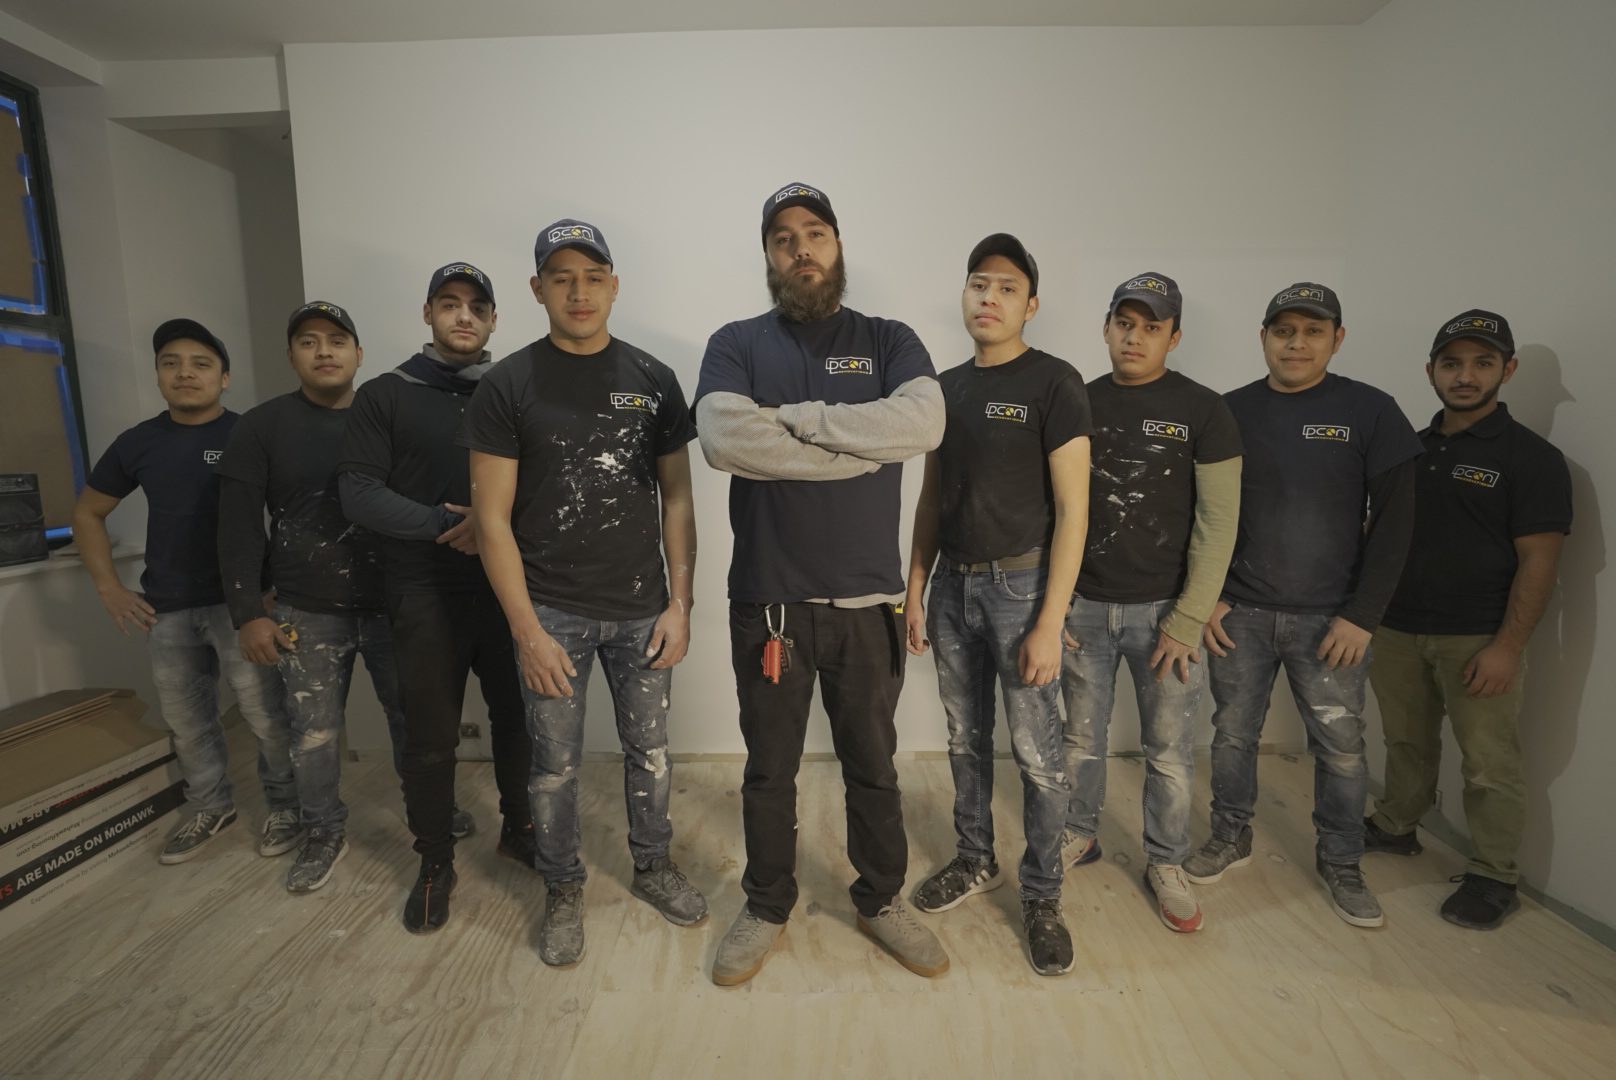 meet-the-team-remodeling-contractor-in-nyc